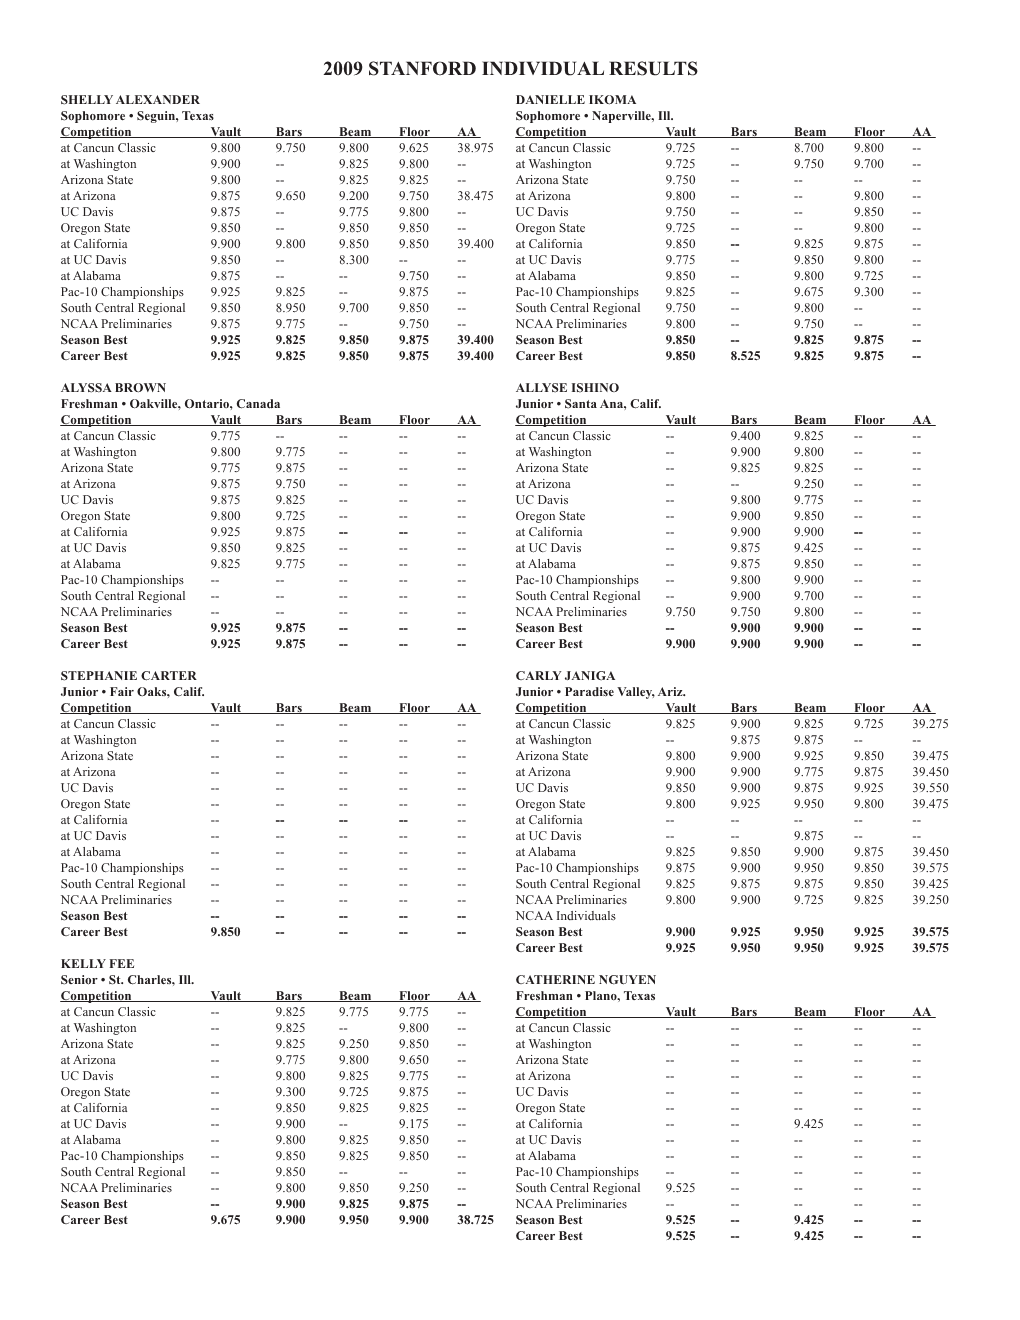 2009 Stanford Individual Results